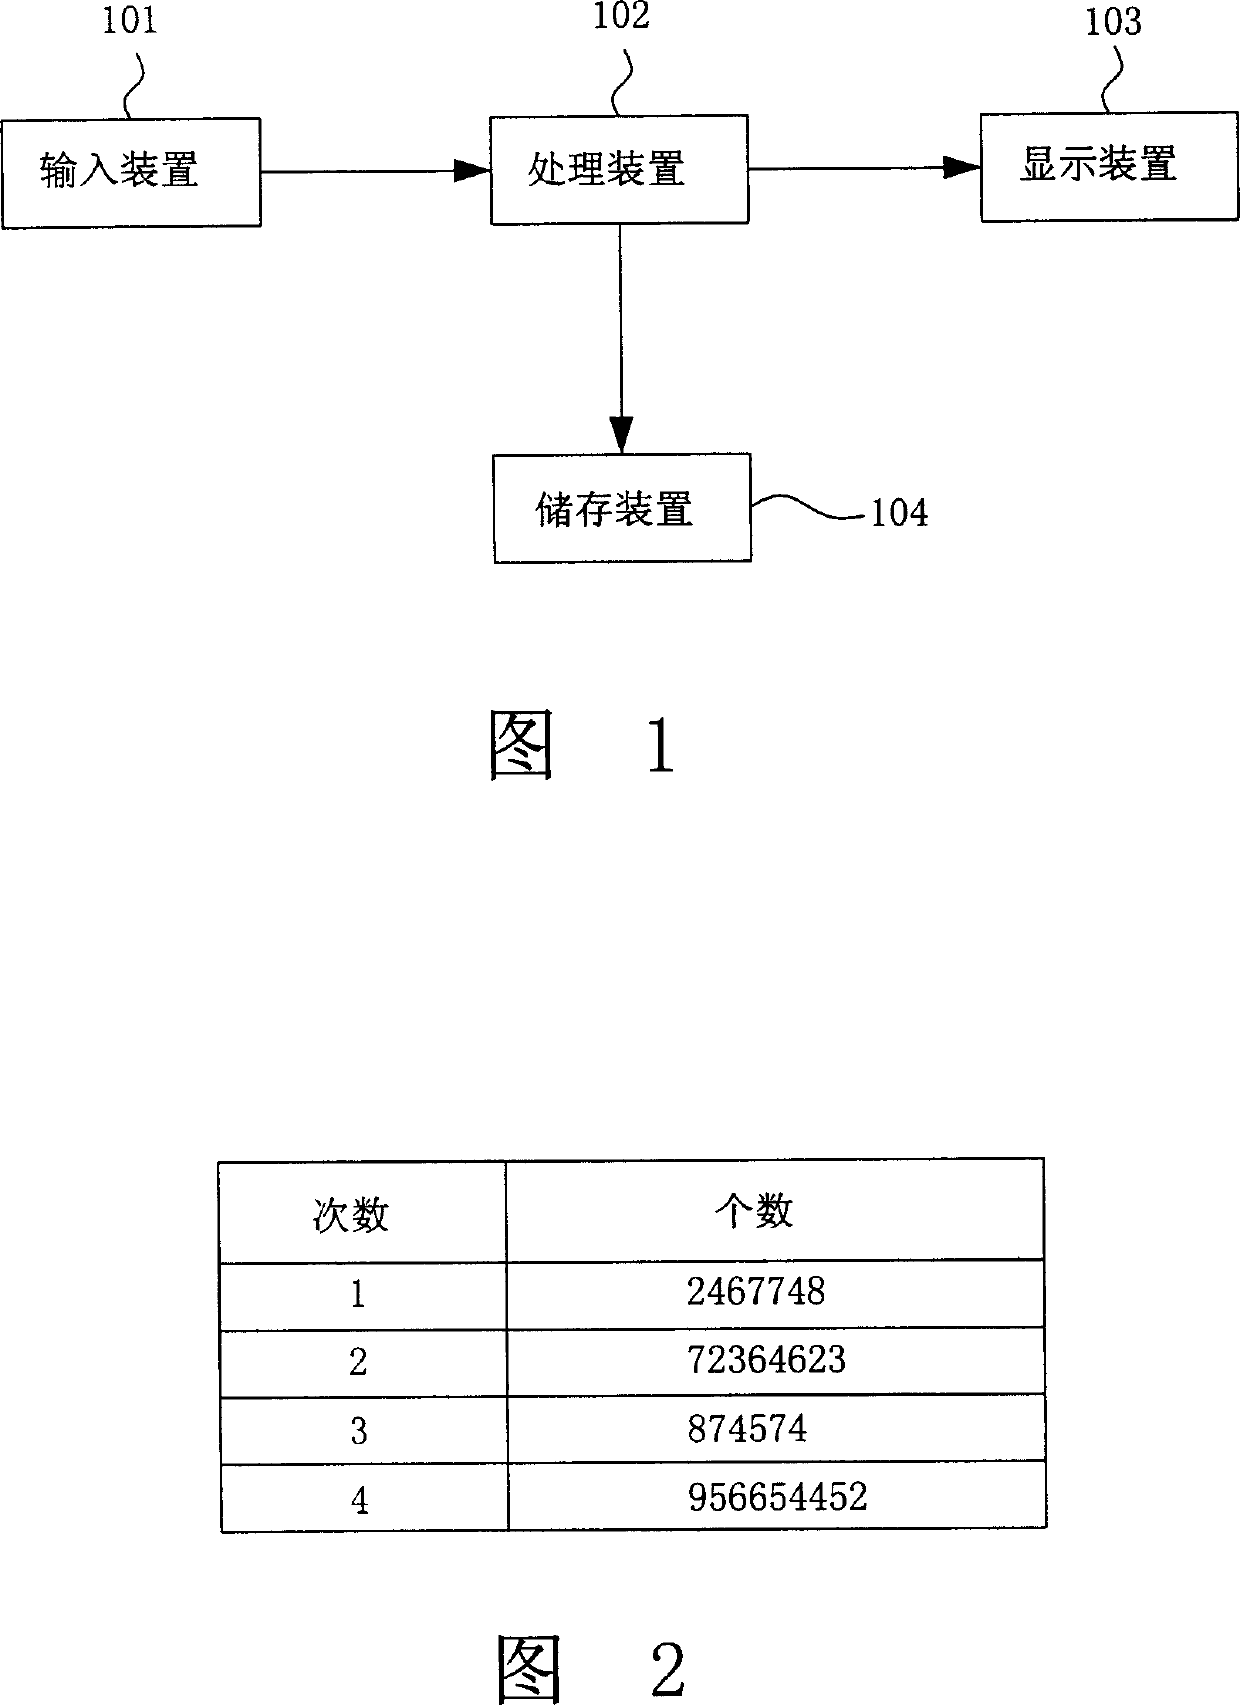 Counting function on mobile electronic equipment, and realization method